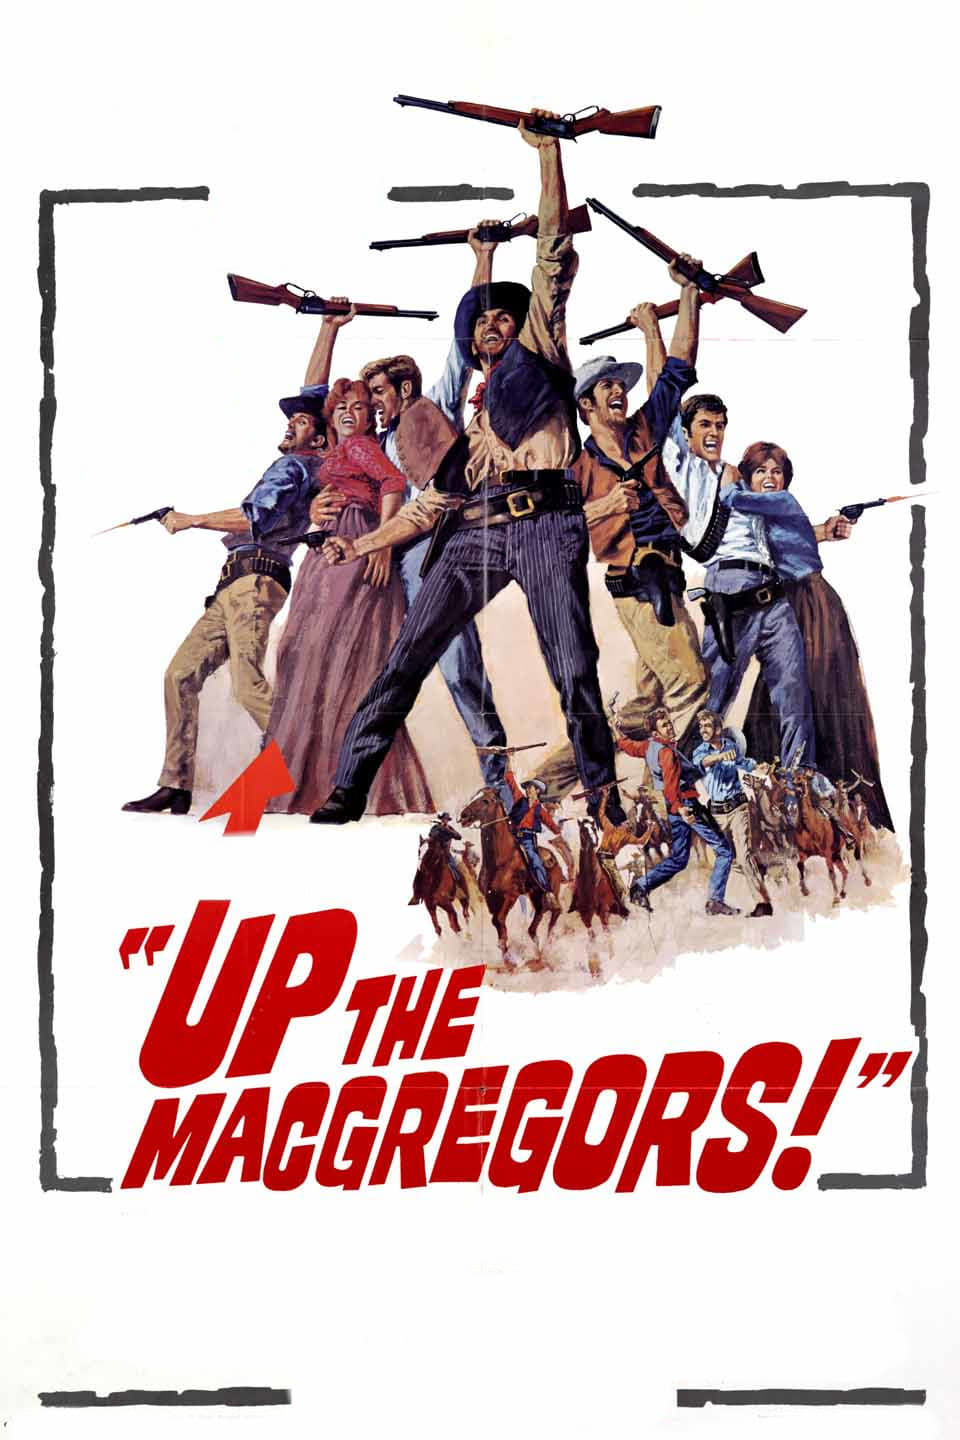 Seven Women for the MacGregors (1967)